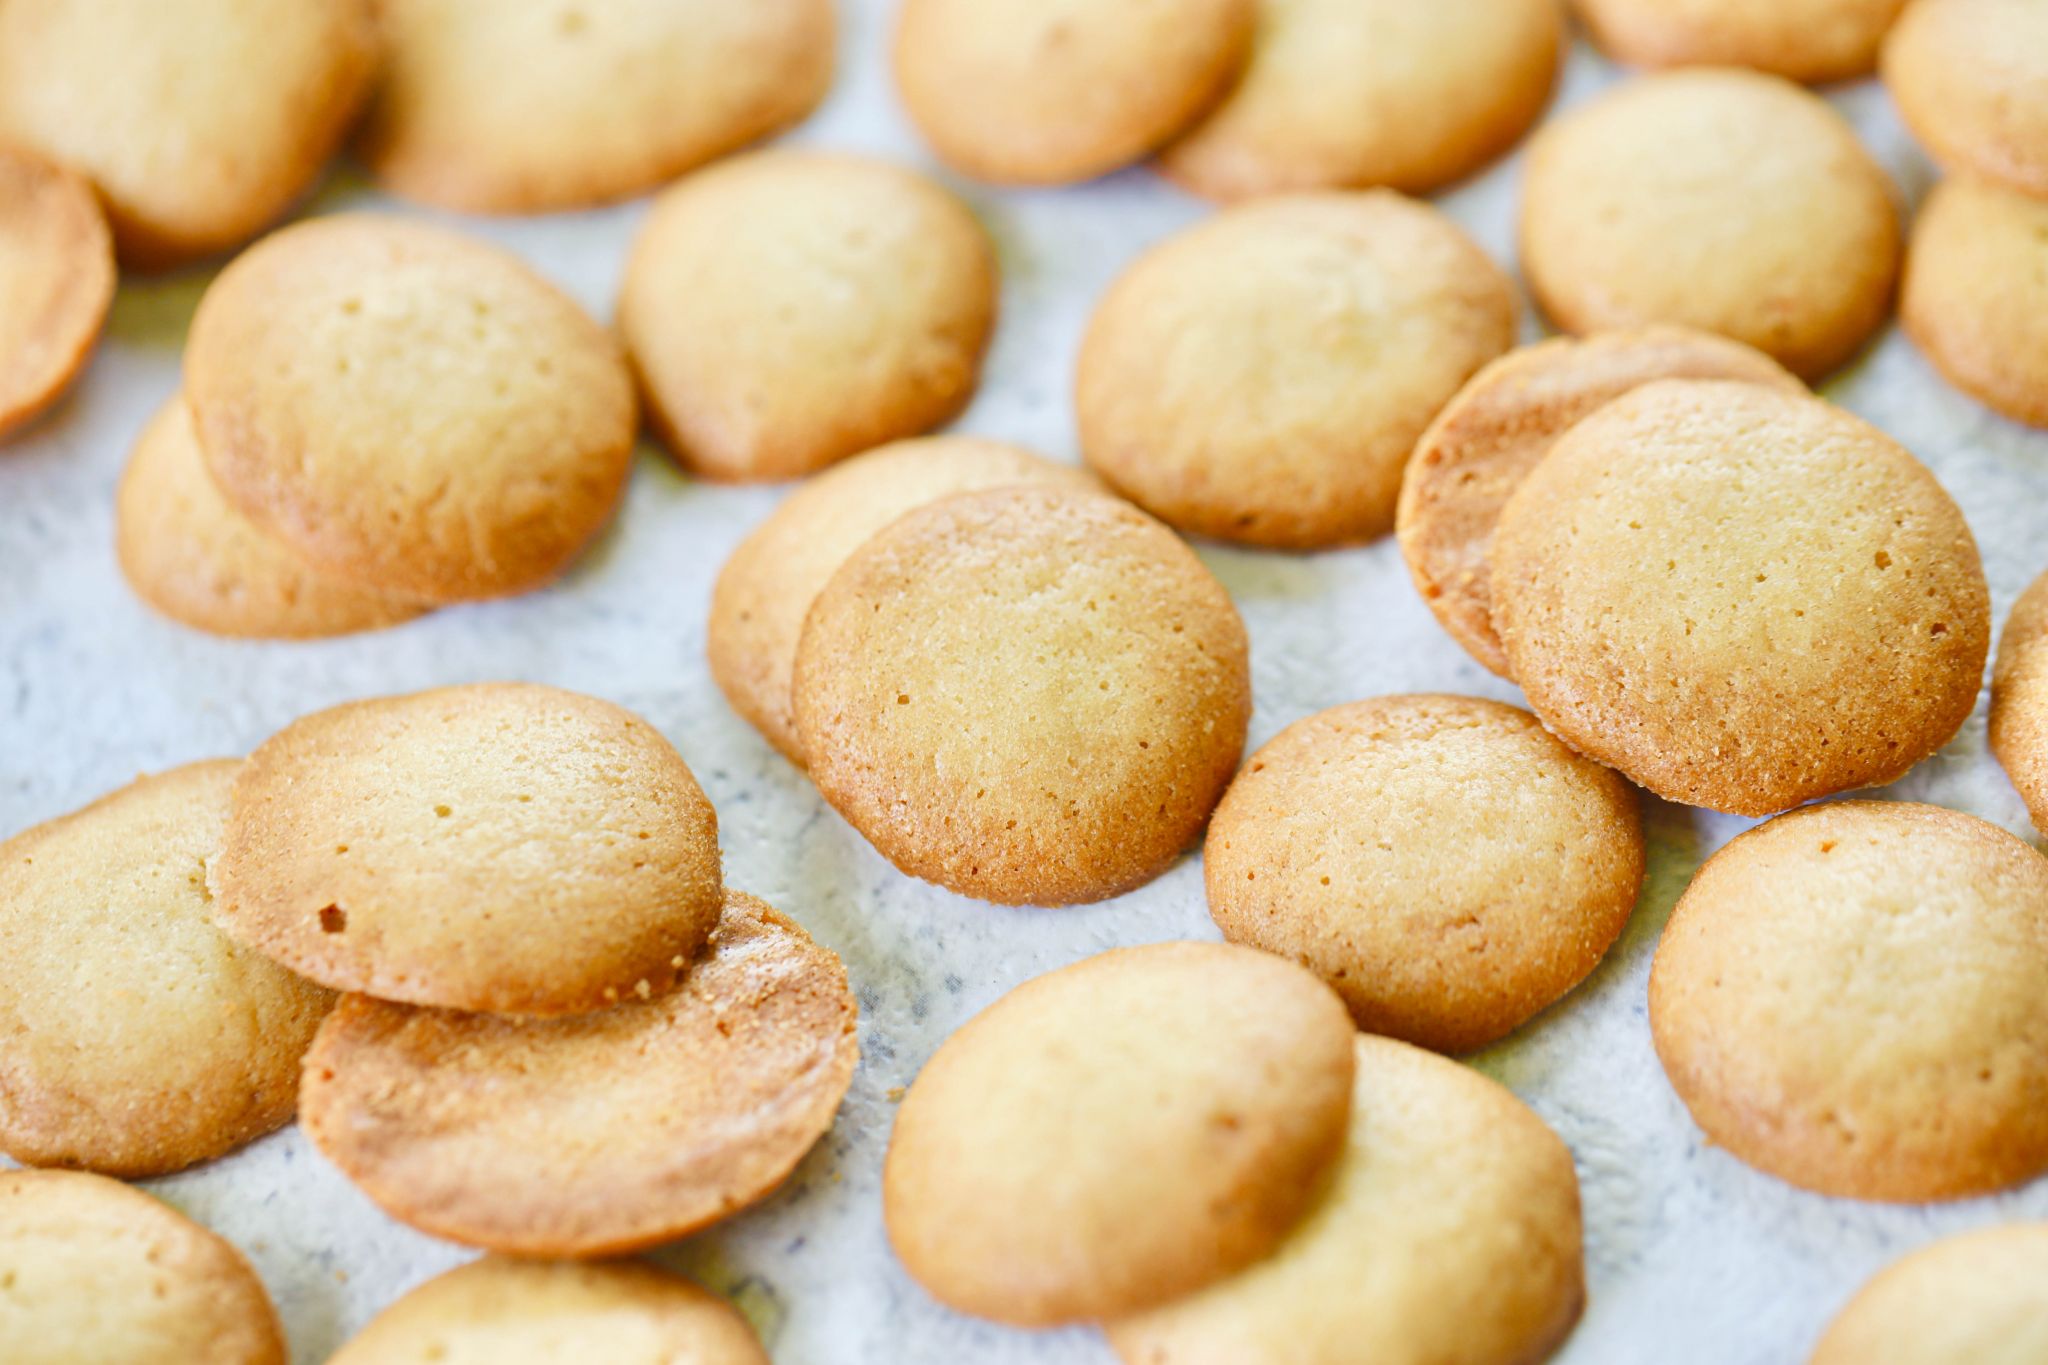 A pile of homemade vanilla wafers, crisp and buttery.